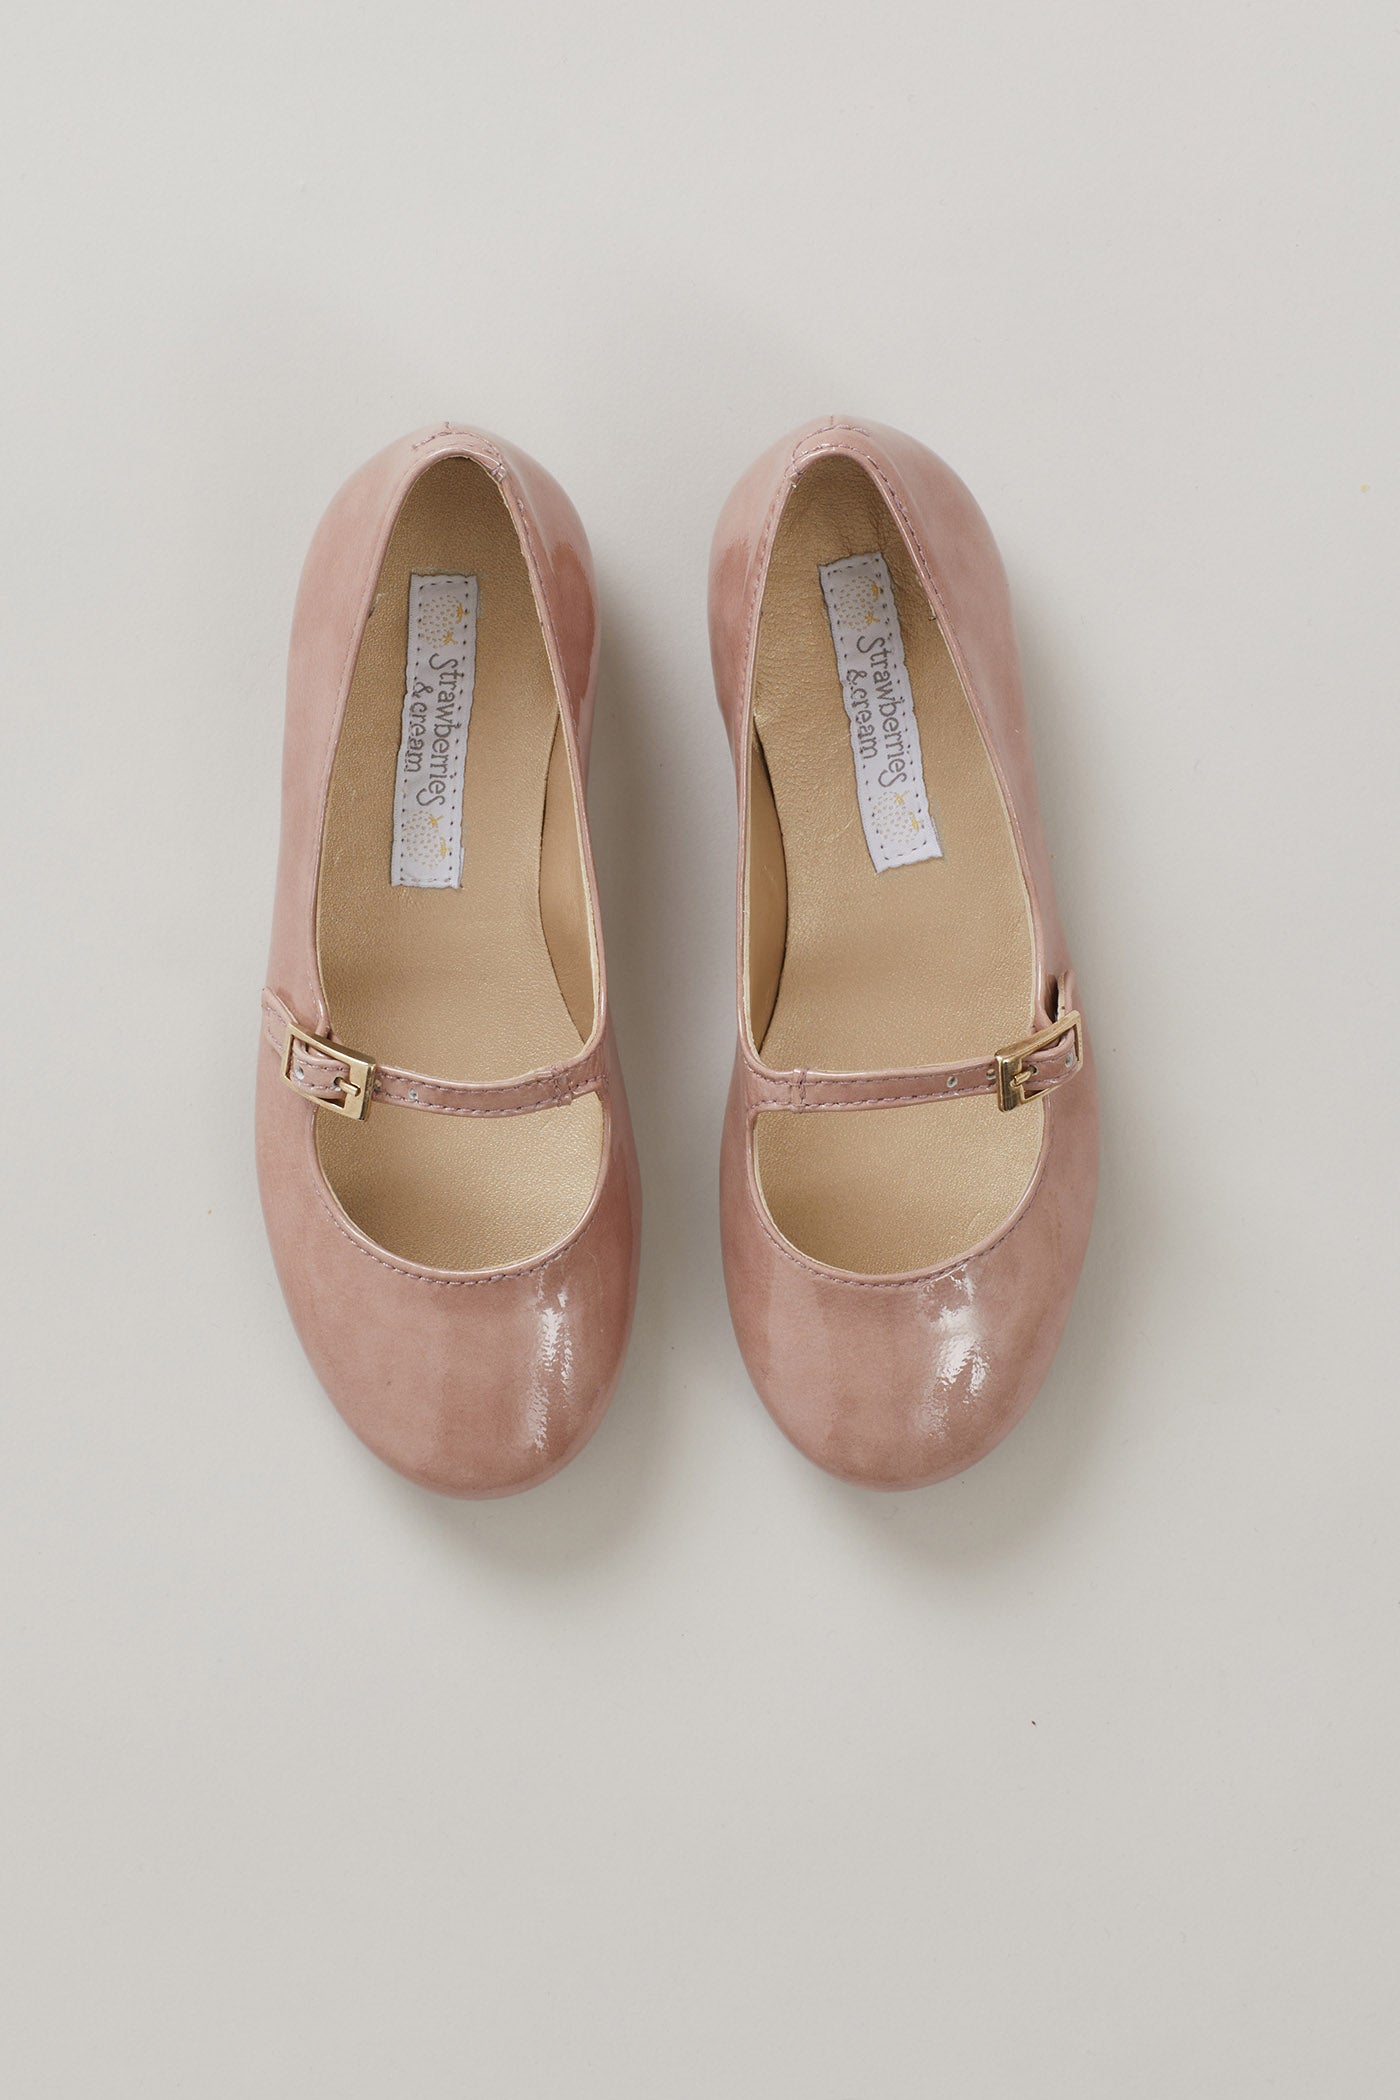 Patent Leather Mary Jane In Dusty Pink